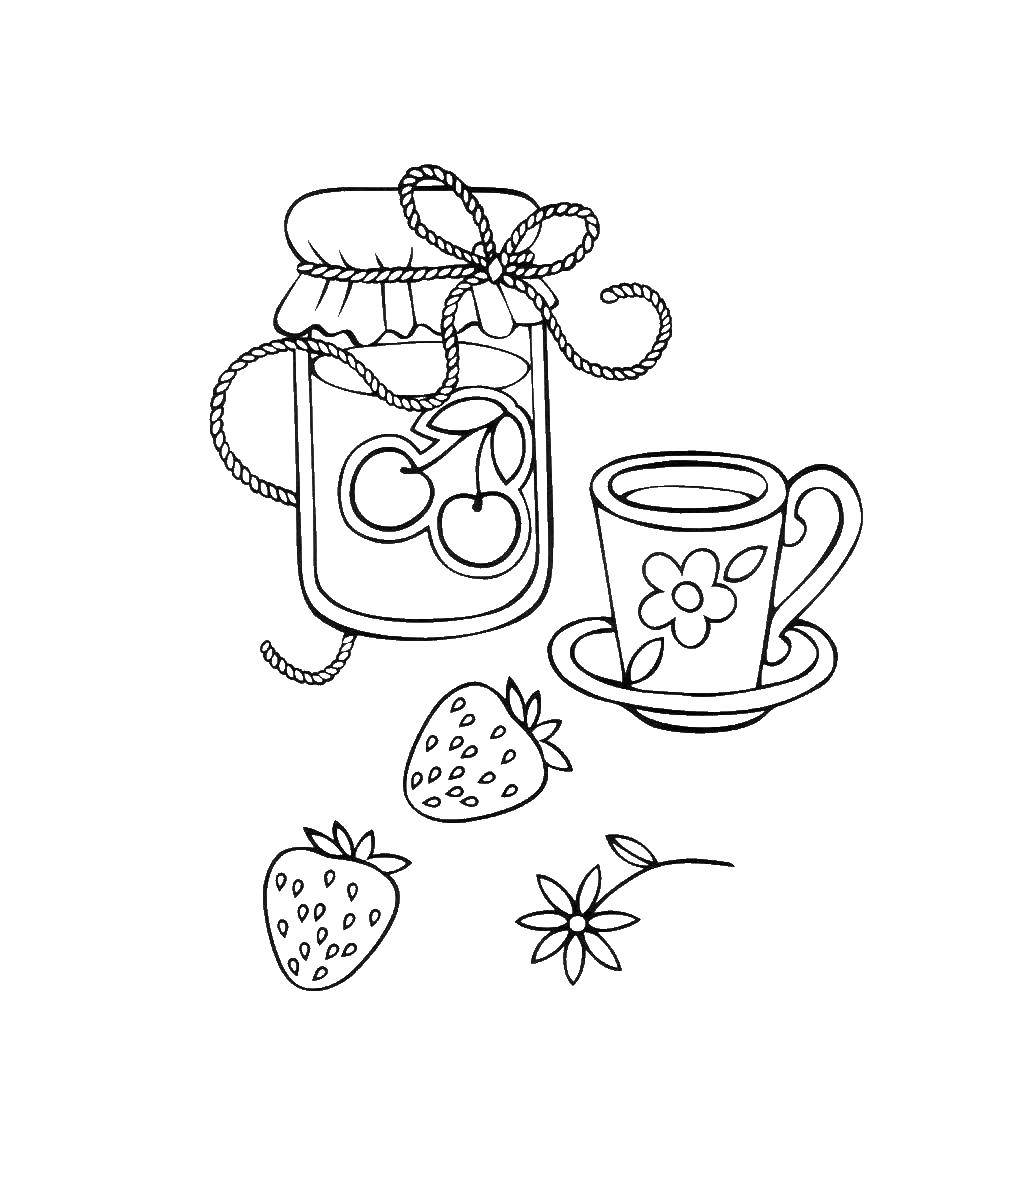 Coloring Cherry jam with tea. Category coloring, buttermilk. Tags:  tea, cherry.